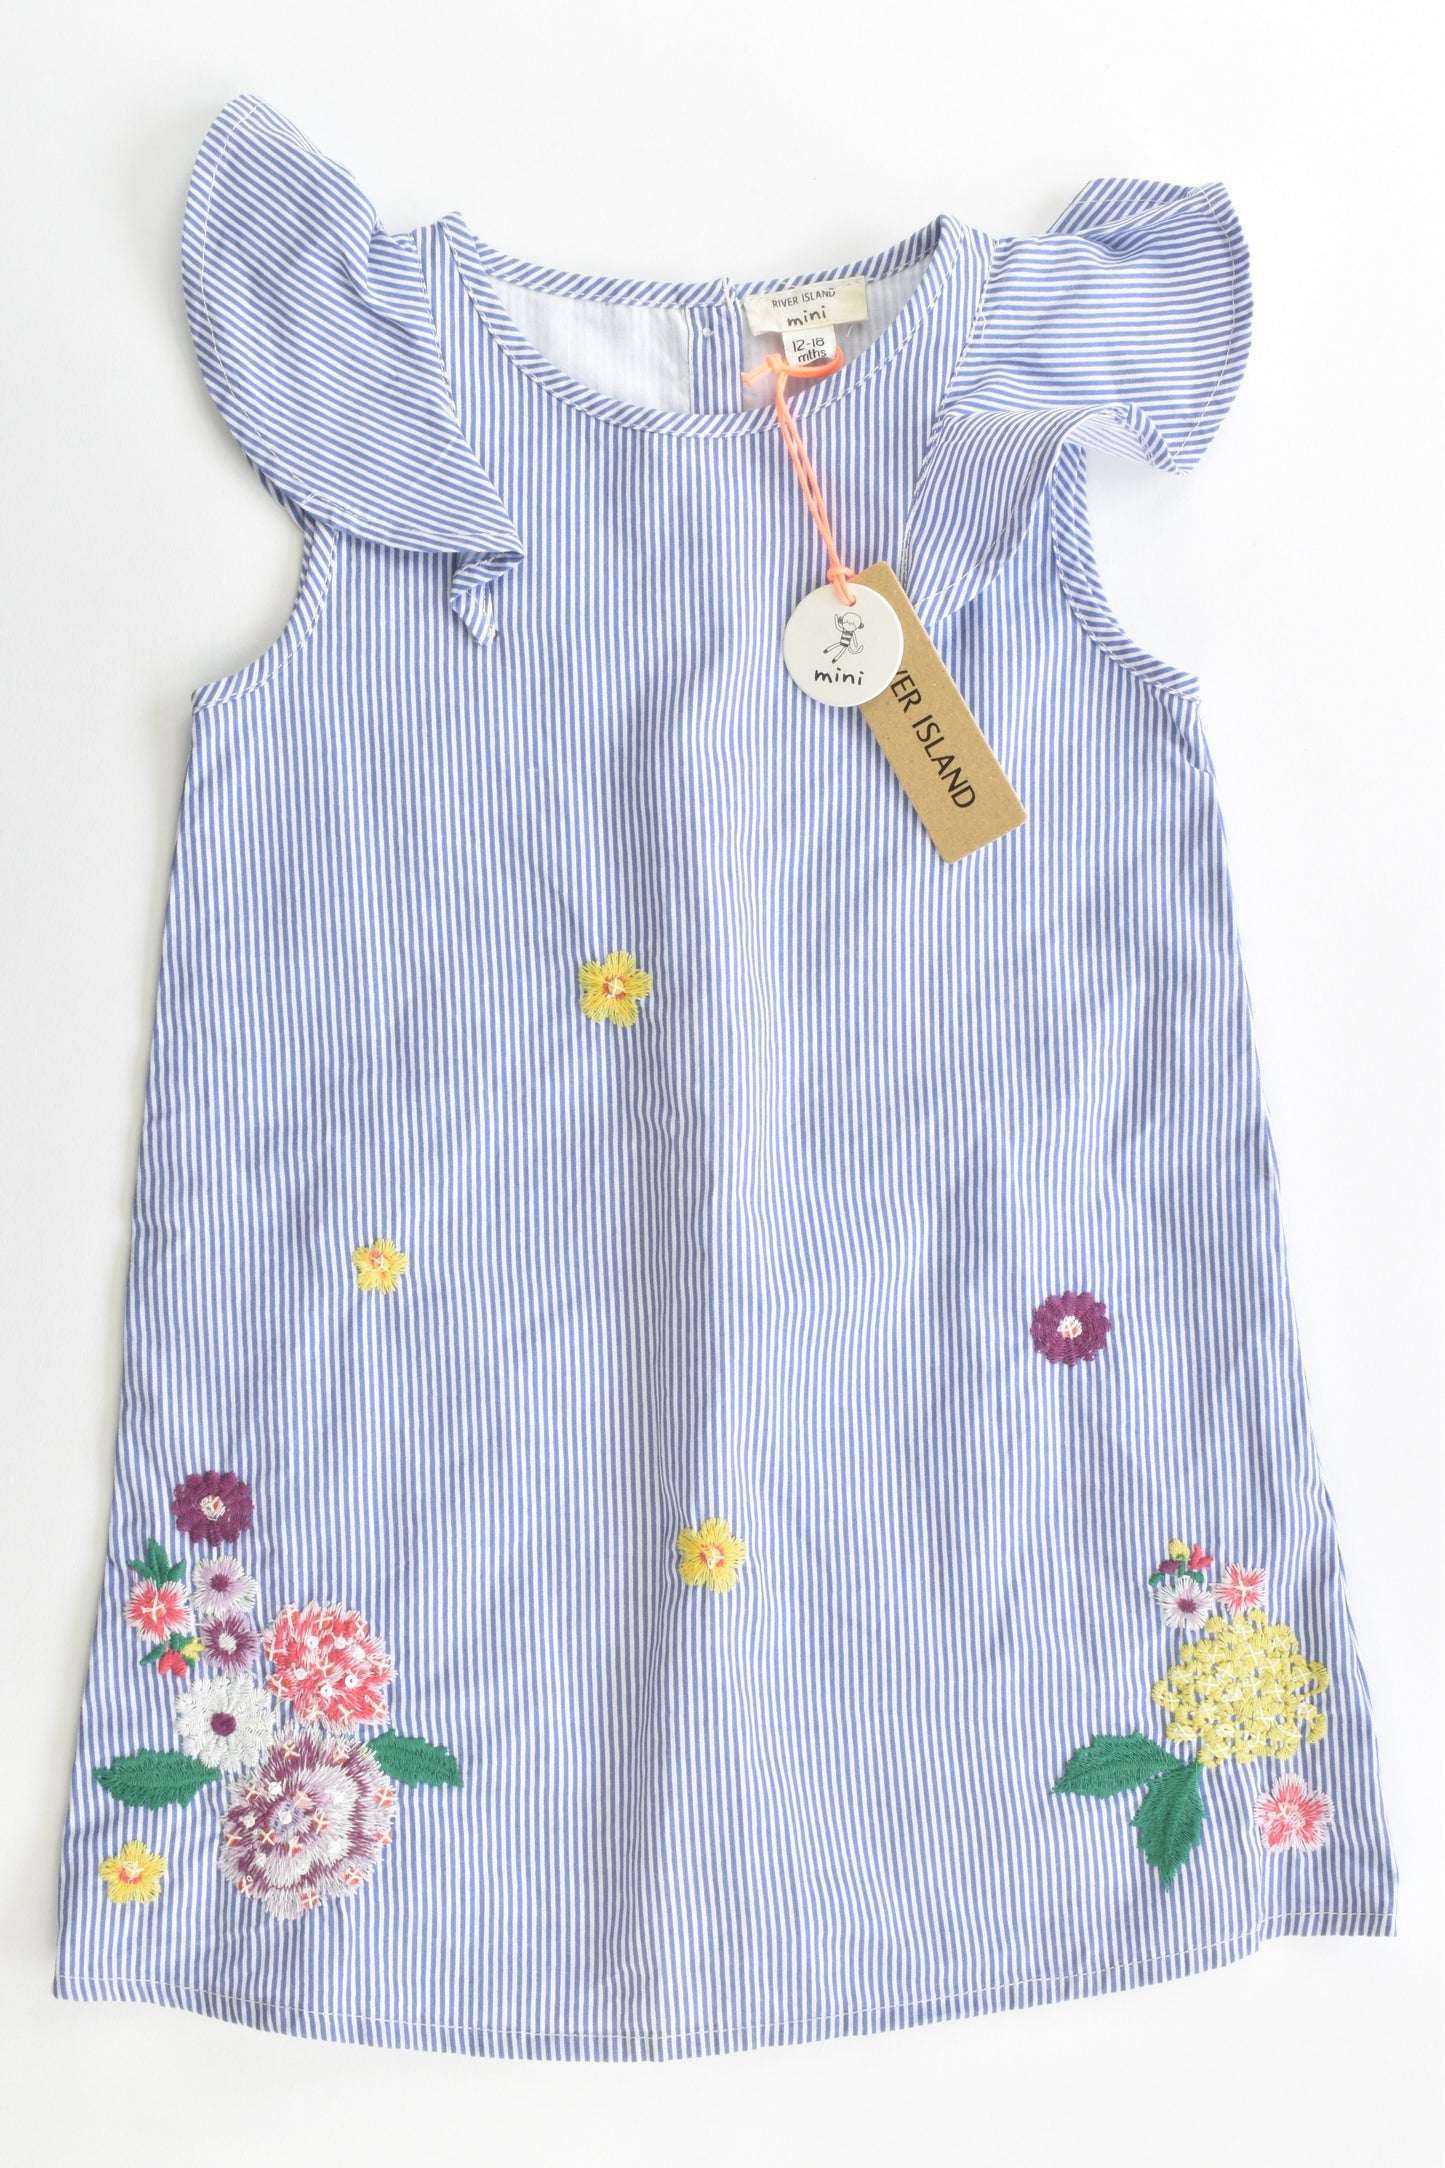 NEW River Island Size 1 (12-18 months, 86 cm) Lined Striped/Floral Dress